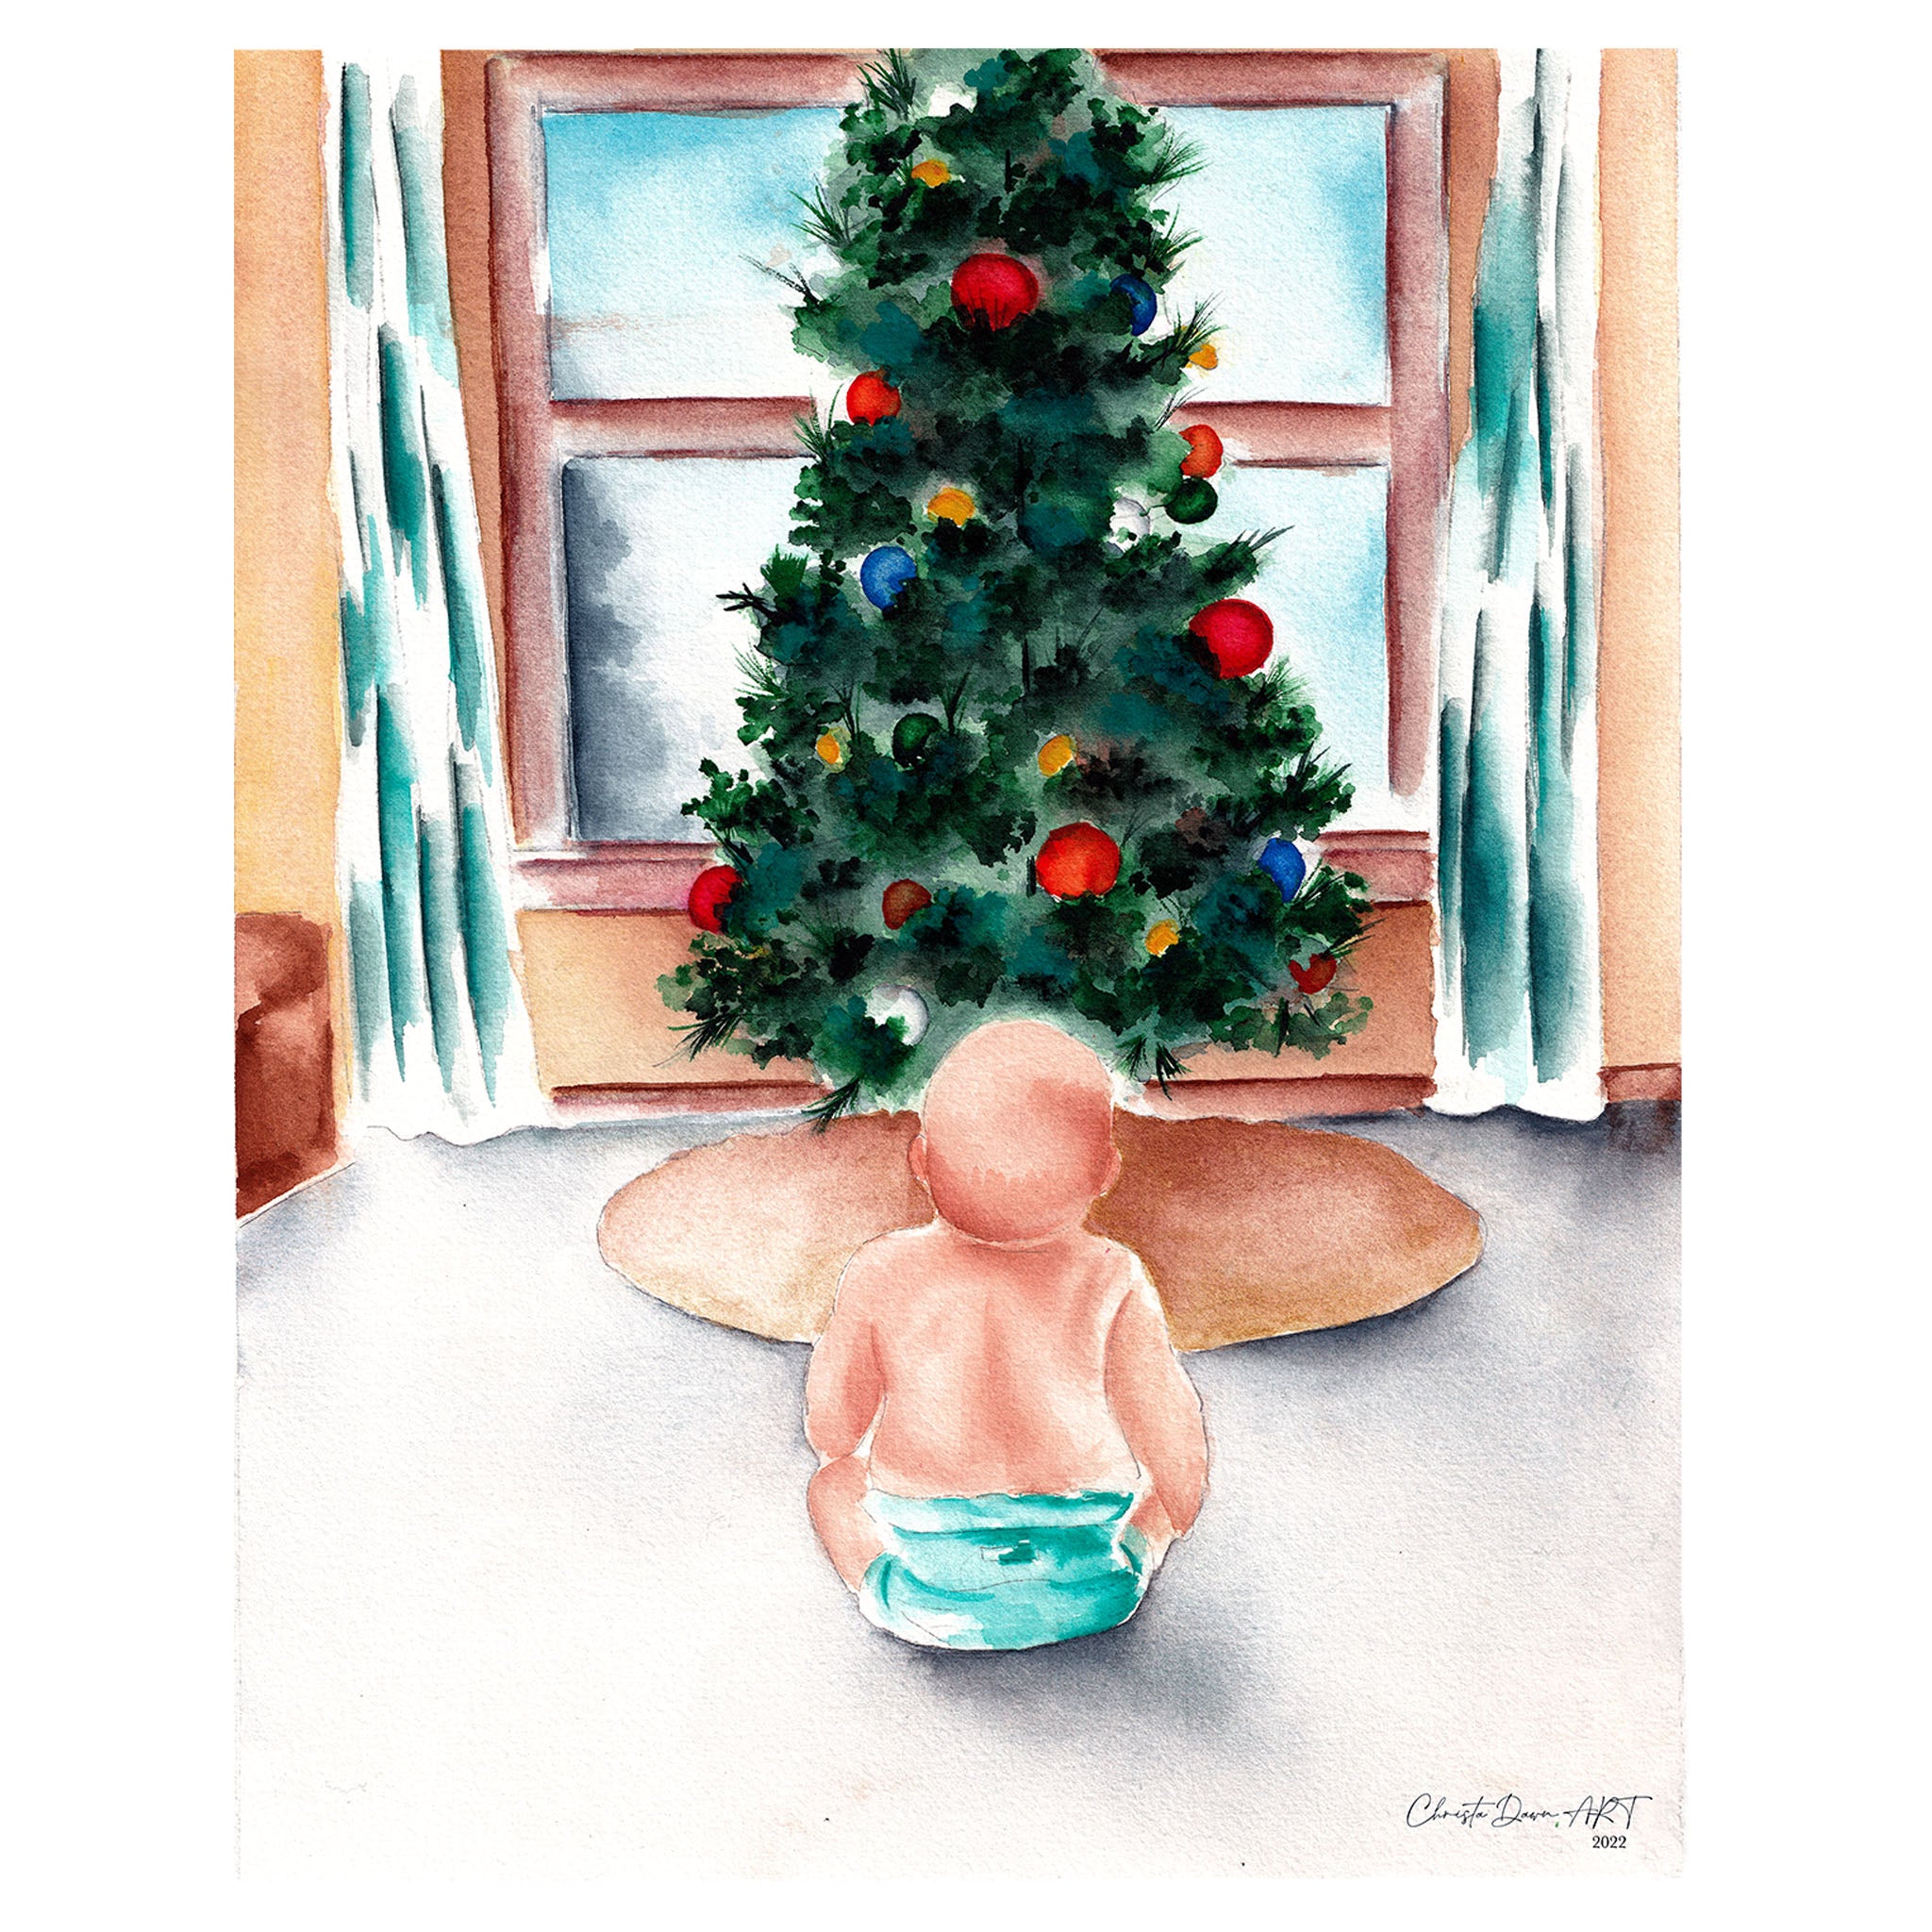 "Wonder" - Christmas Child Watercolor Painting